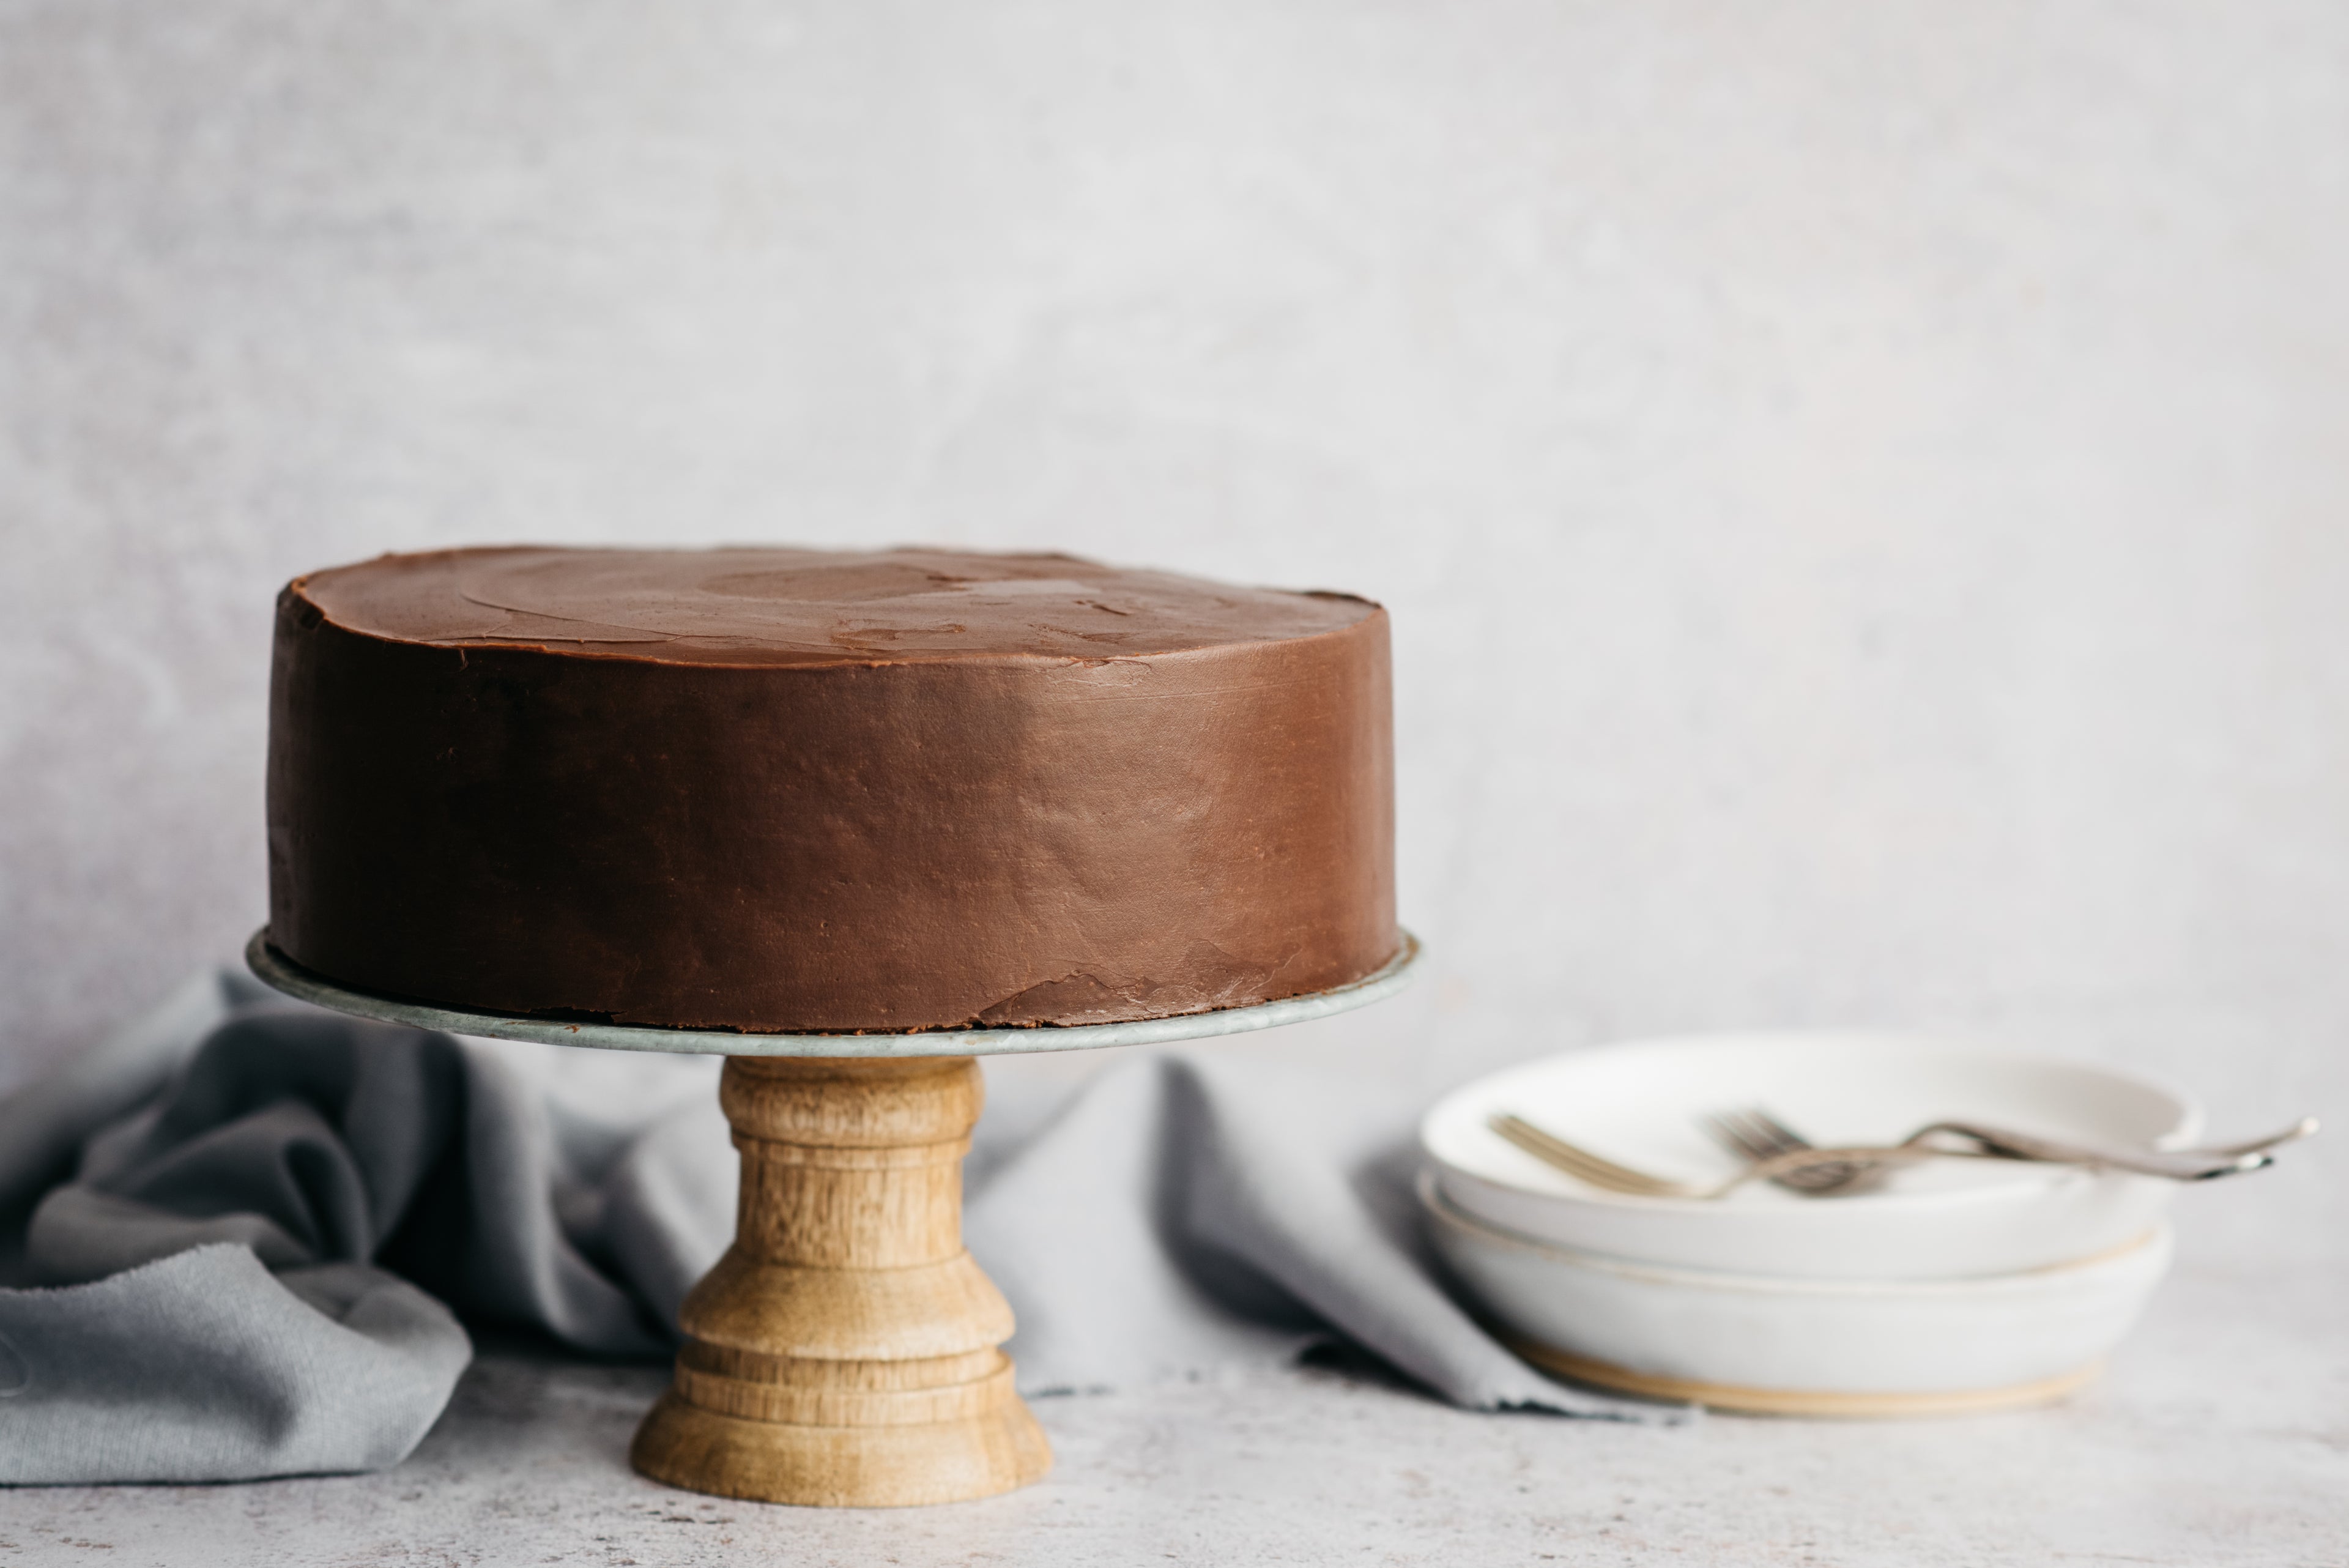 Best Chocolate Cake smothered in chocolate ganache on a cake stand 